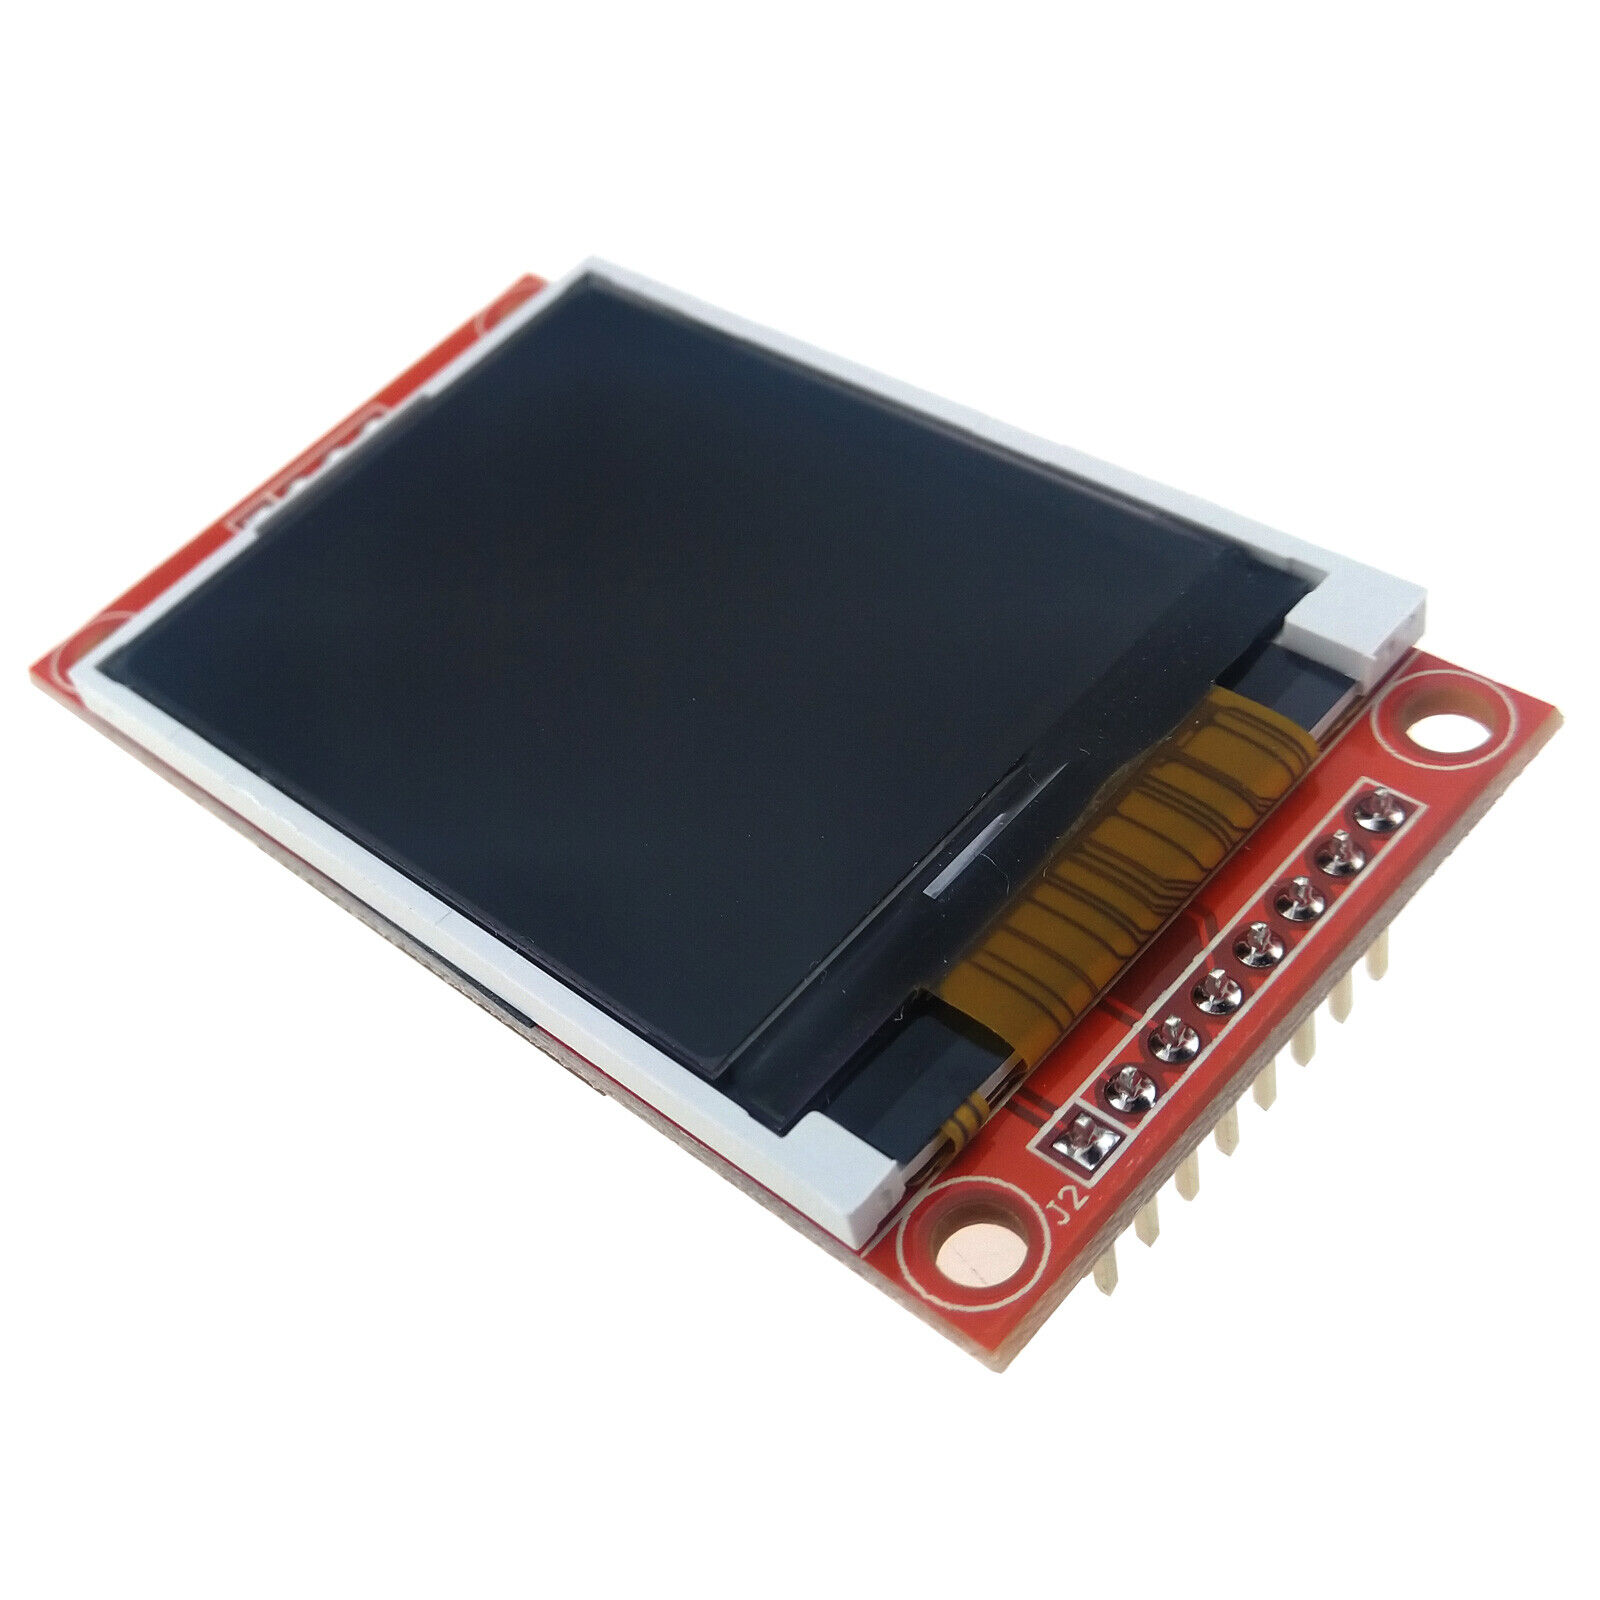 1.8 inch TFT LCD Display SPI Module 128x160 Color ST7735 Driver SD Card Slot